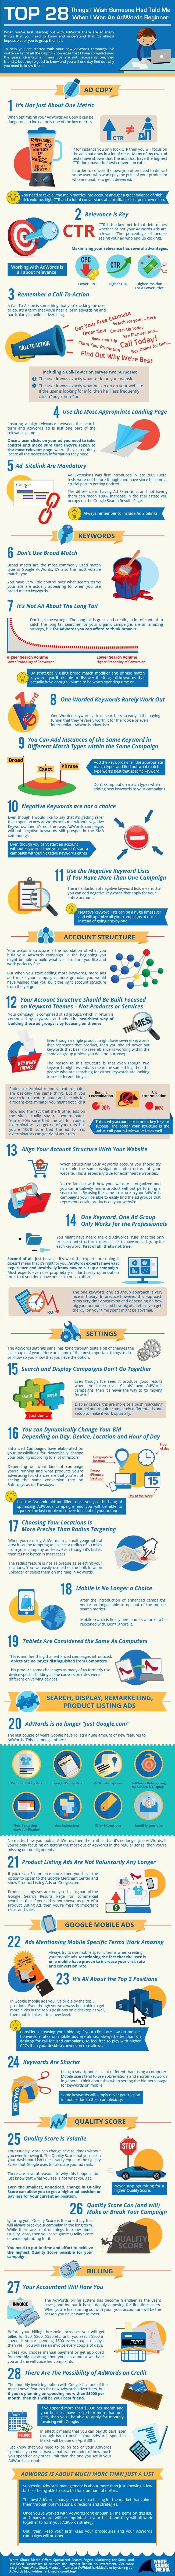 Advertising-Infographics-Top-28-things-I-wish-someone-had-told-me-when-I-was-an-AdWords-beginner-infogr Advertising Infographics : #VIP #Infographie 28 astuces pour les débutants sur Adwords via Pinterest web